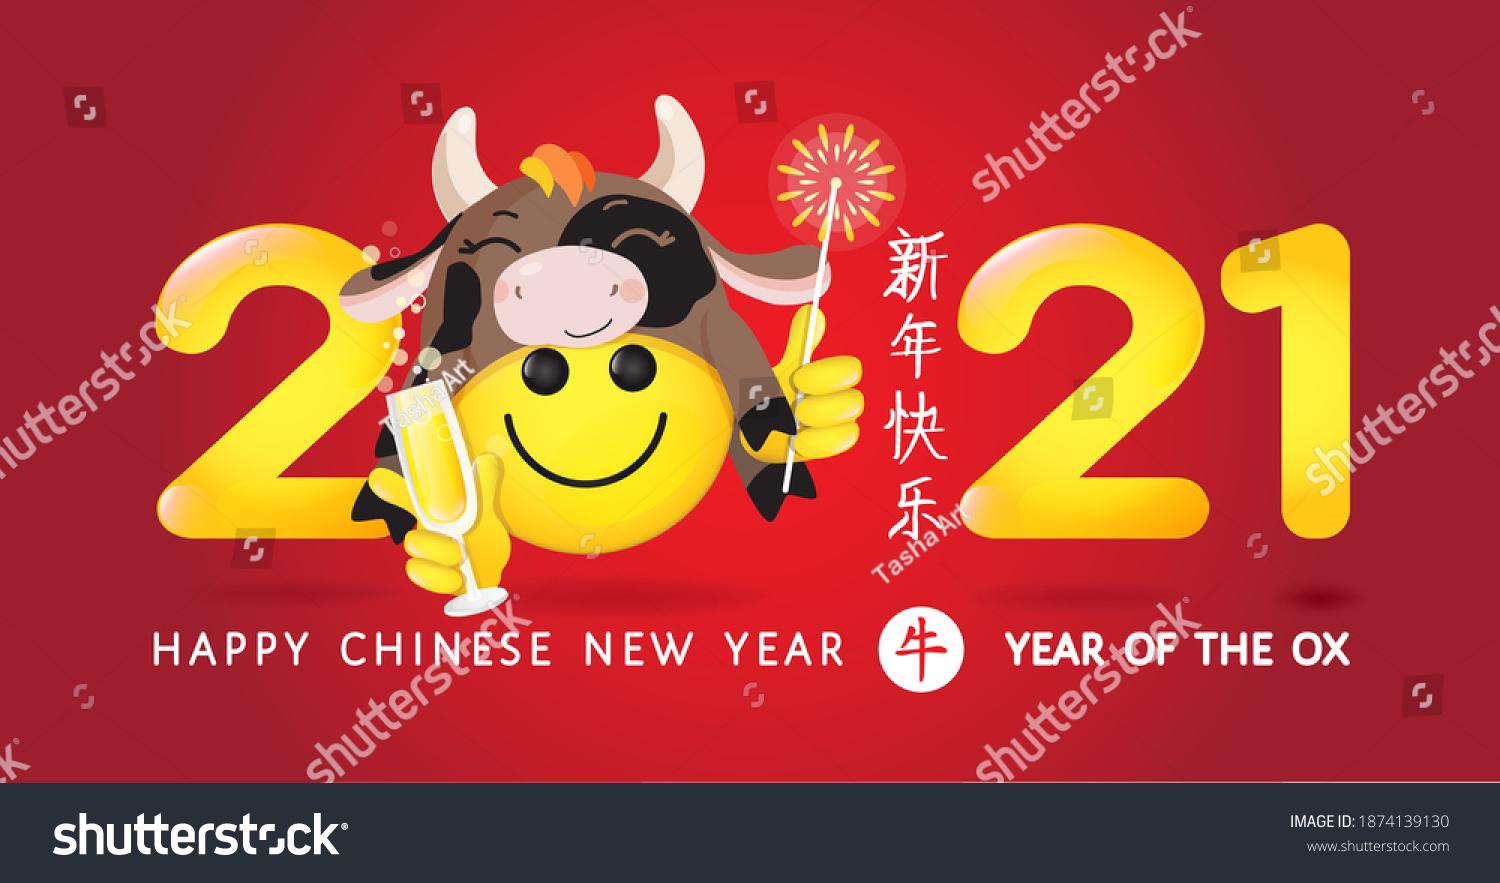 SVG of 2021 Happy Chinese new Year, year of the ox greeting vector banner with emoji, emoticon in cow bull hat, holding a glass of champagne, sparkler. Chinese calligraphy translation: Good Fortune, New Year svg